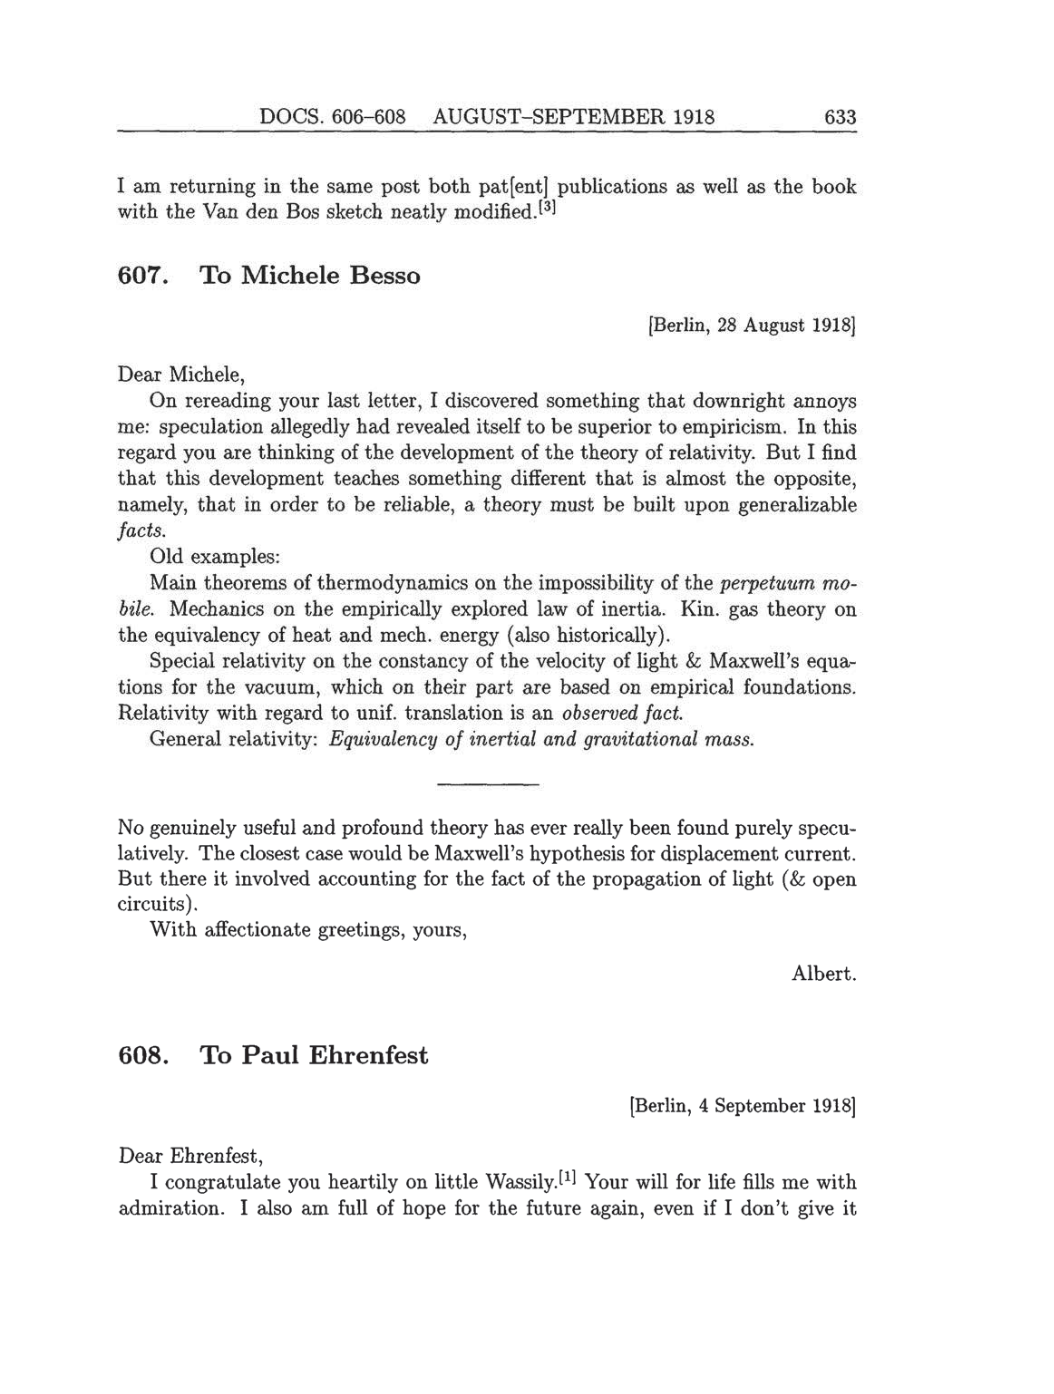 Volume 8: The Berlin Years: Correspondence, 1914-1918 (English translation supplement) page 633